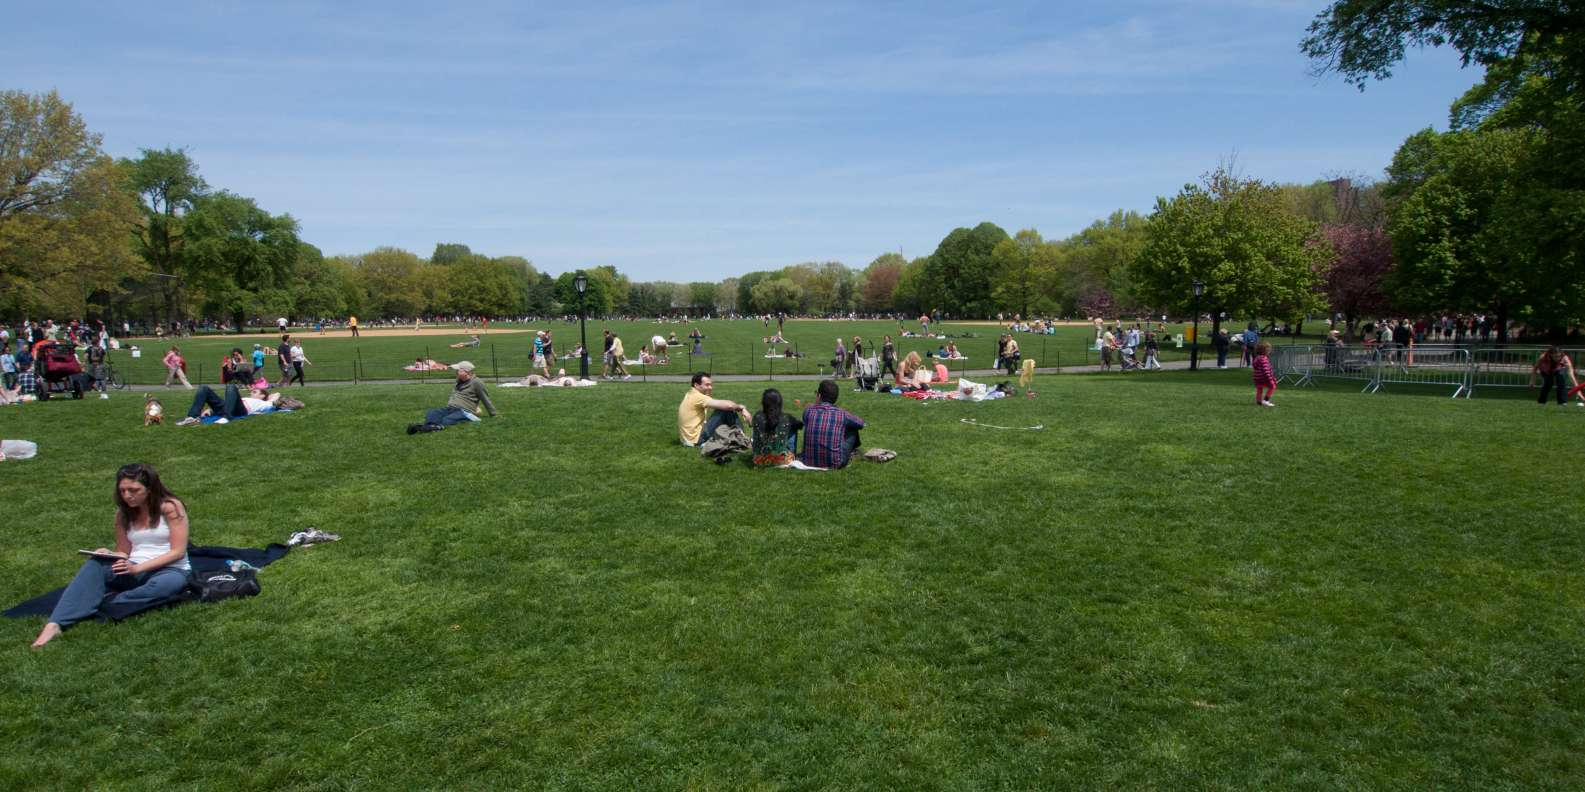 Great Lawn, New York City - Book Tickets & Tours | GetYourGuide